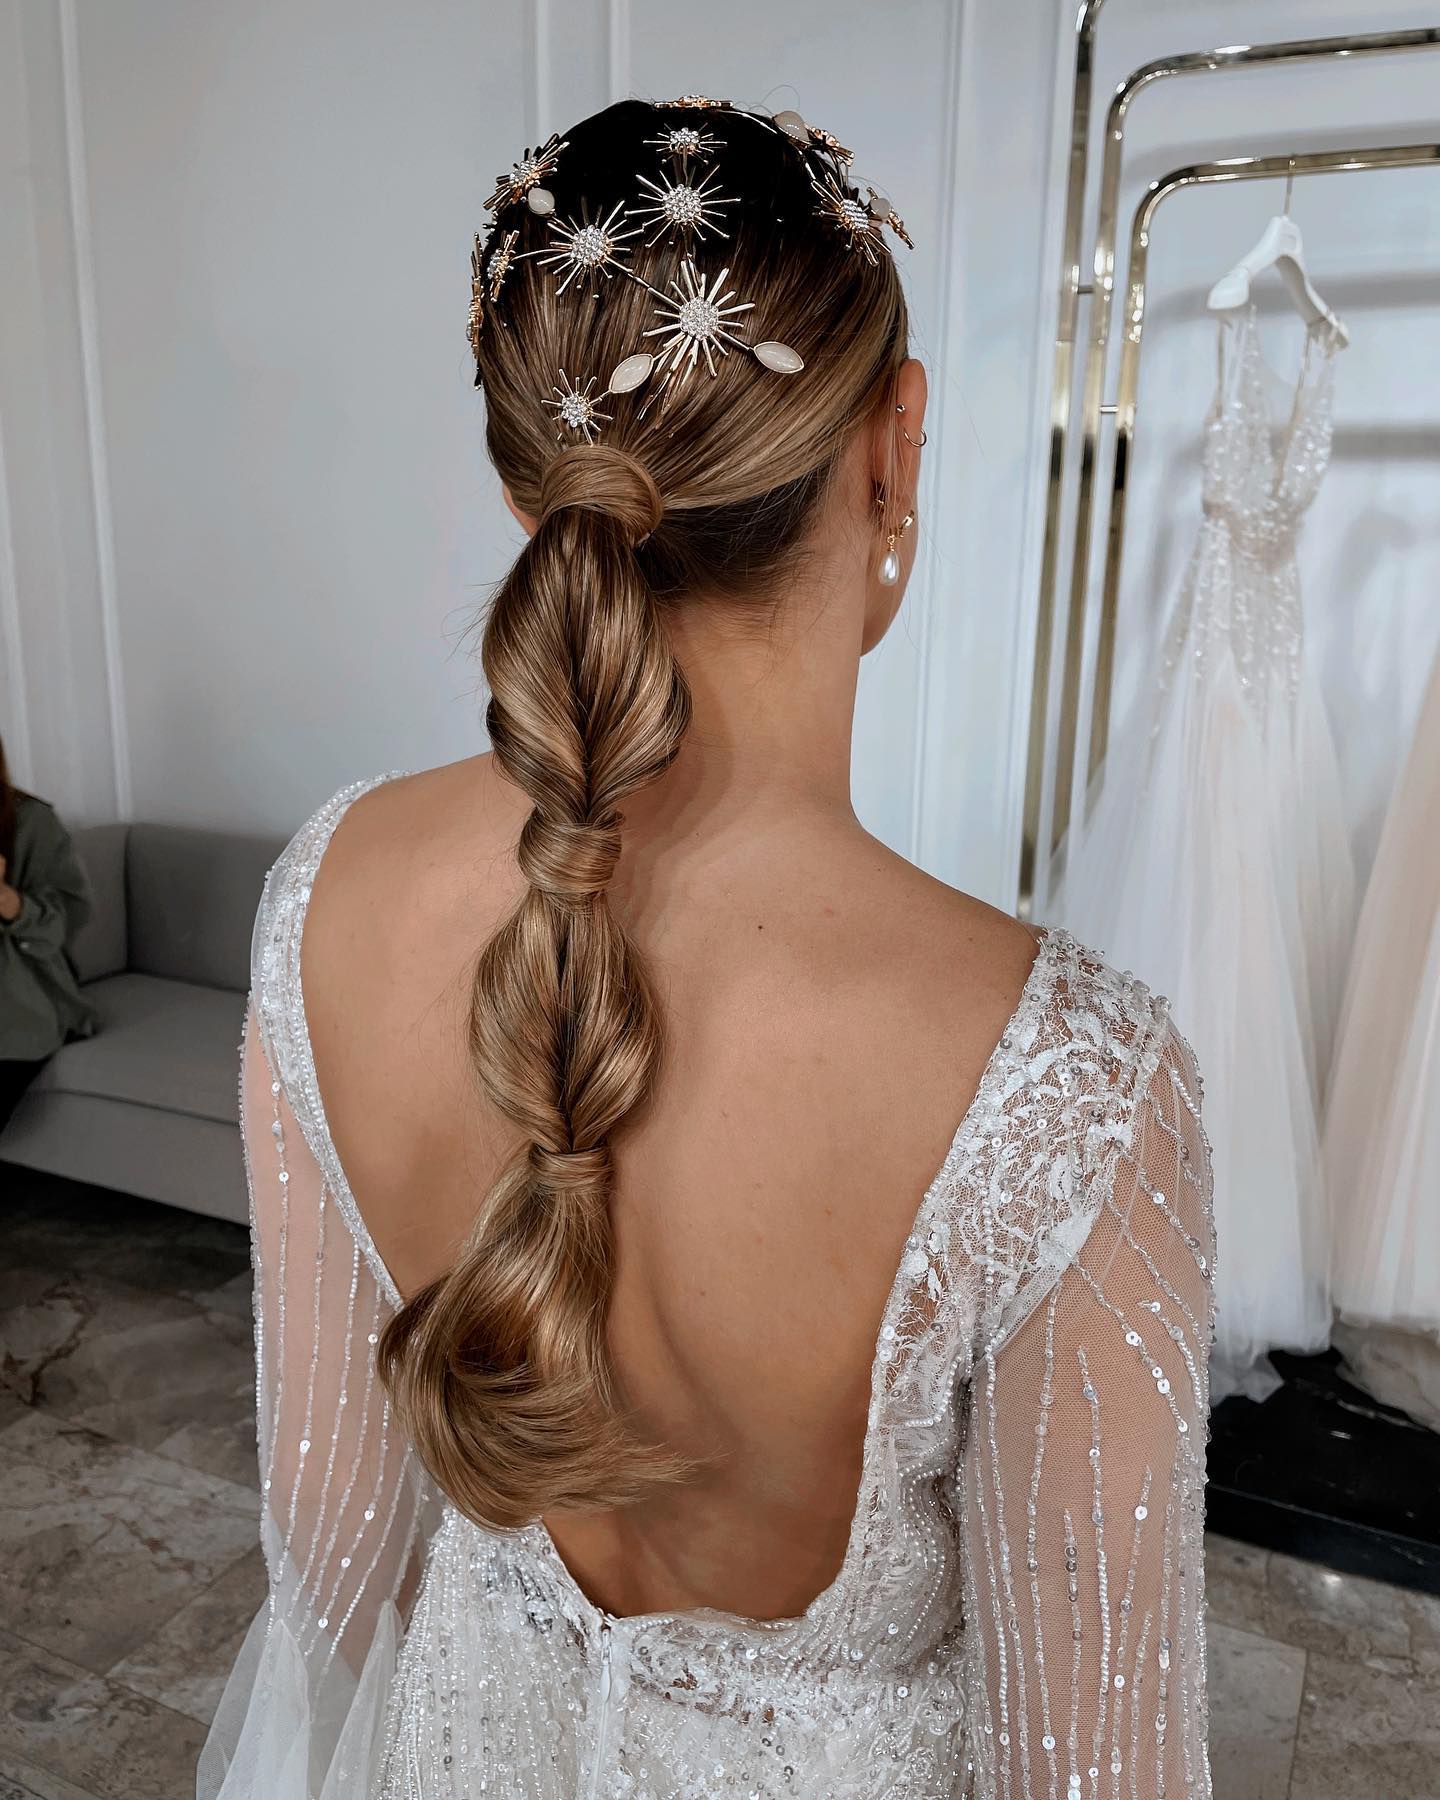 bubble braid pony with accessories